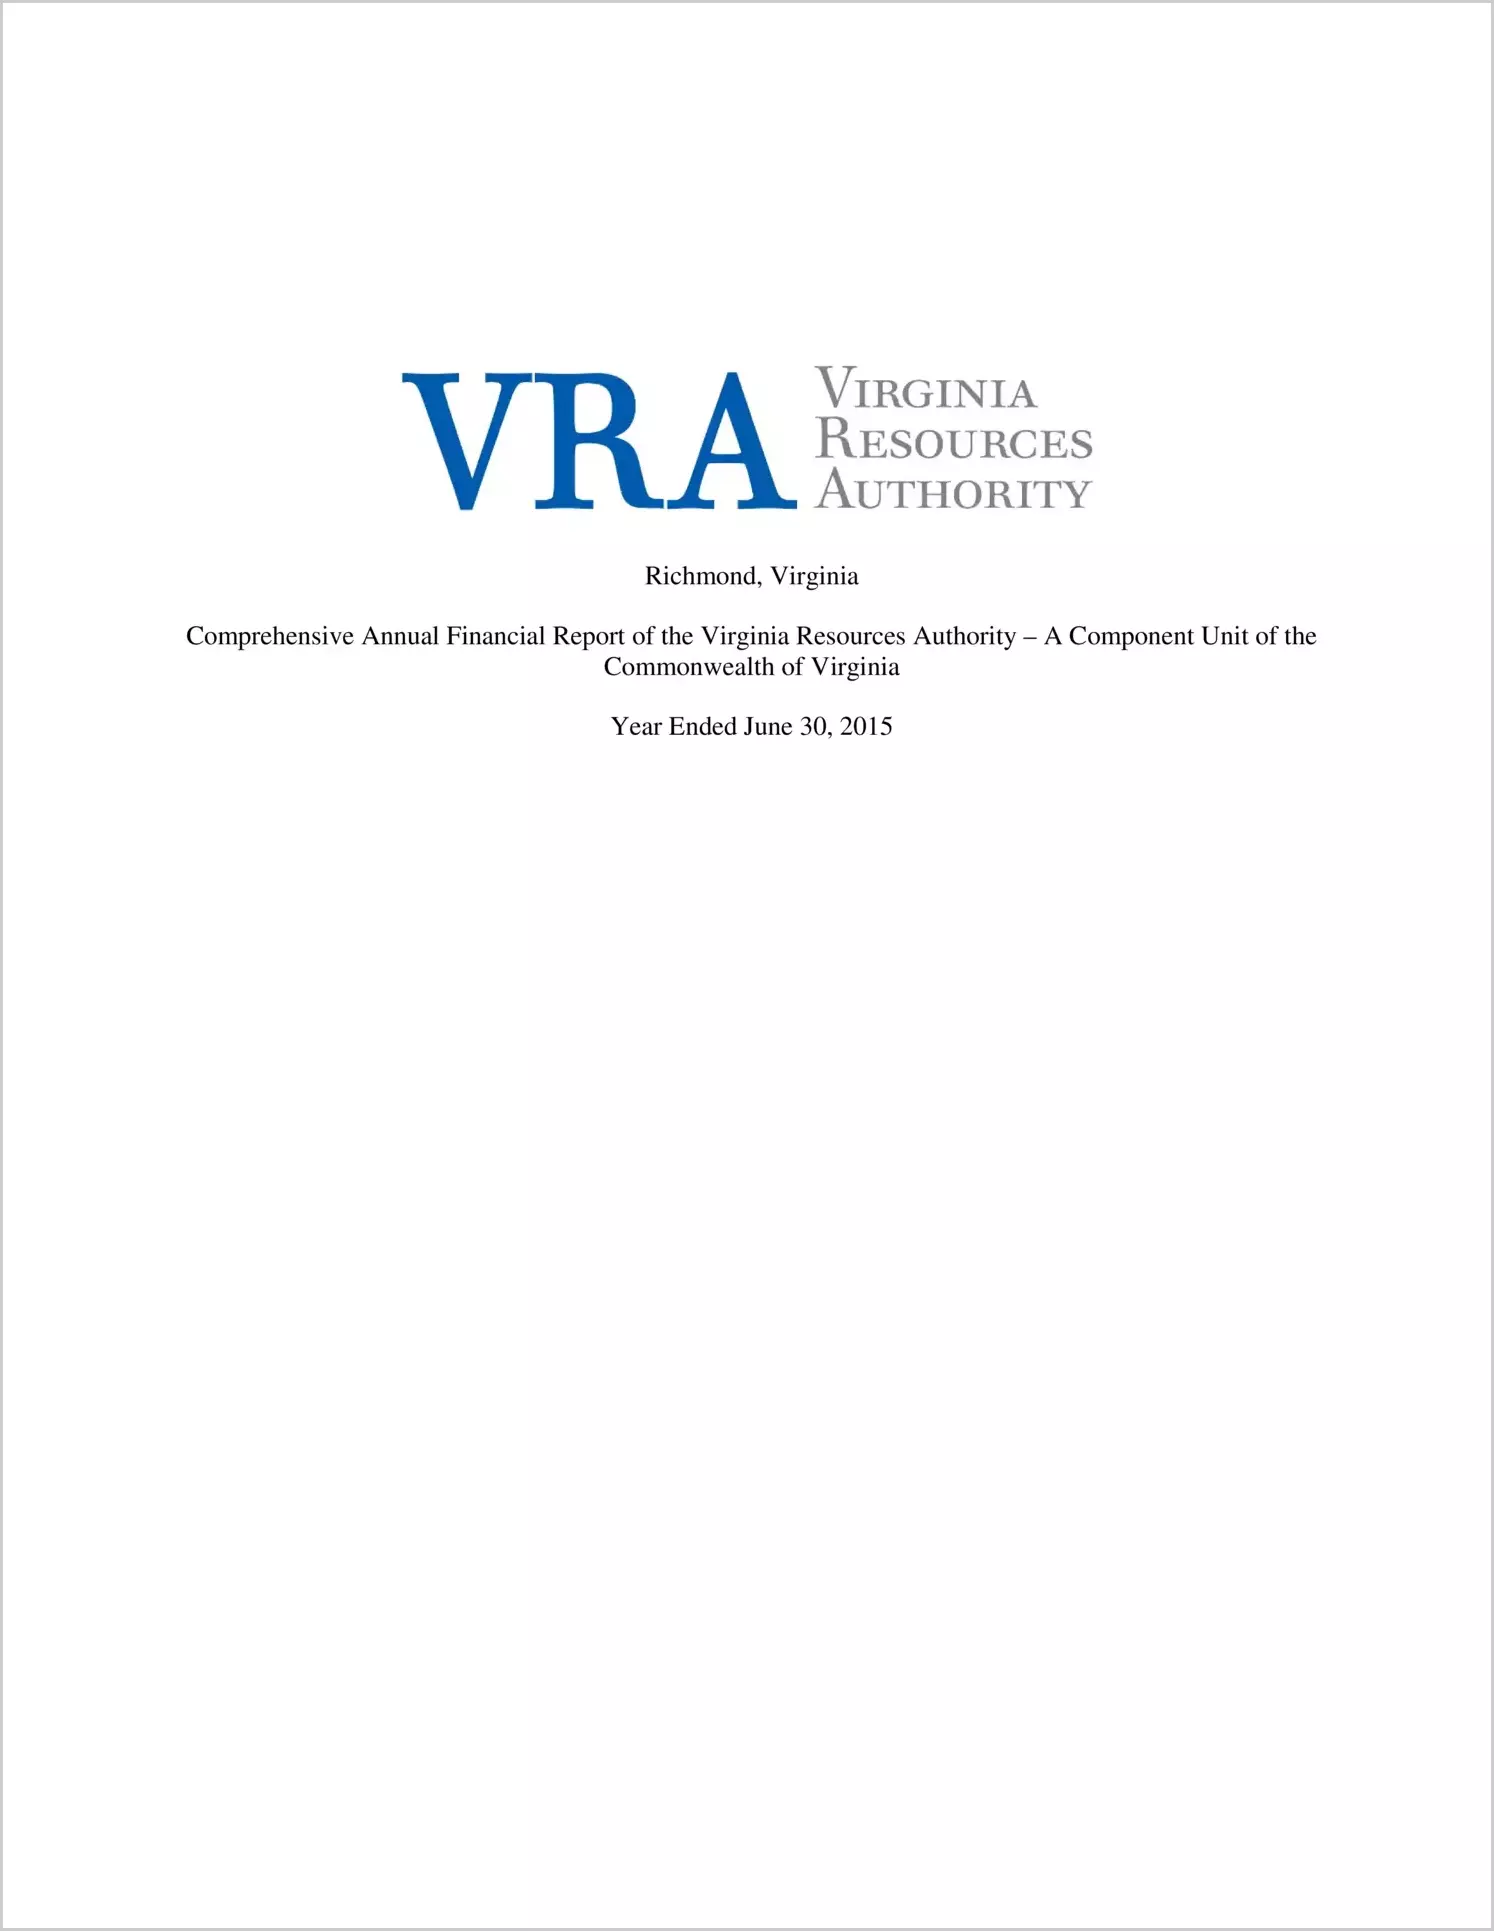 Virginia Resources Authority Financial Statements for the fiscal year ended June 30, 2015